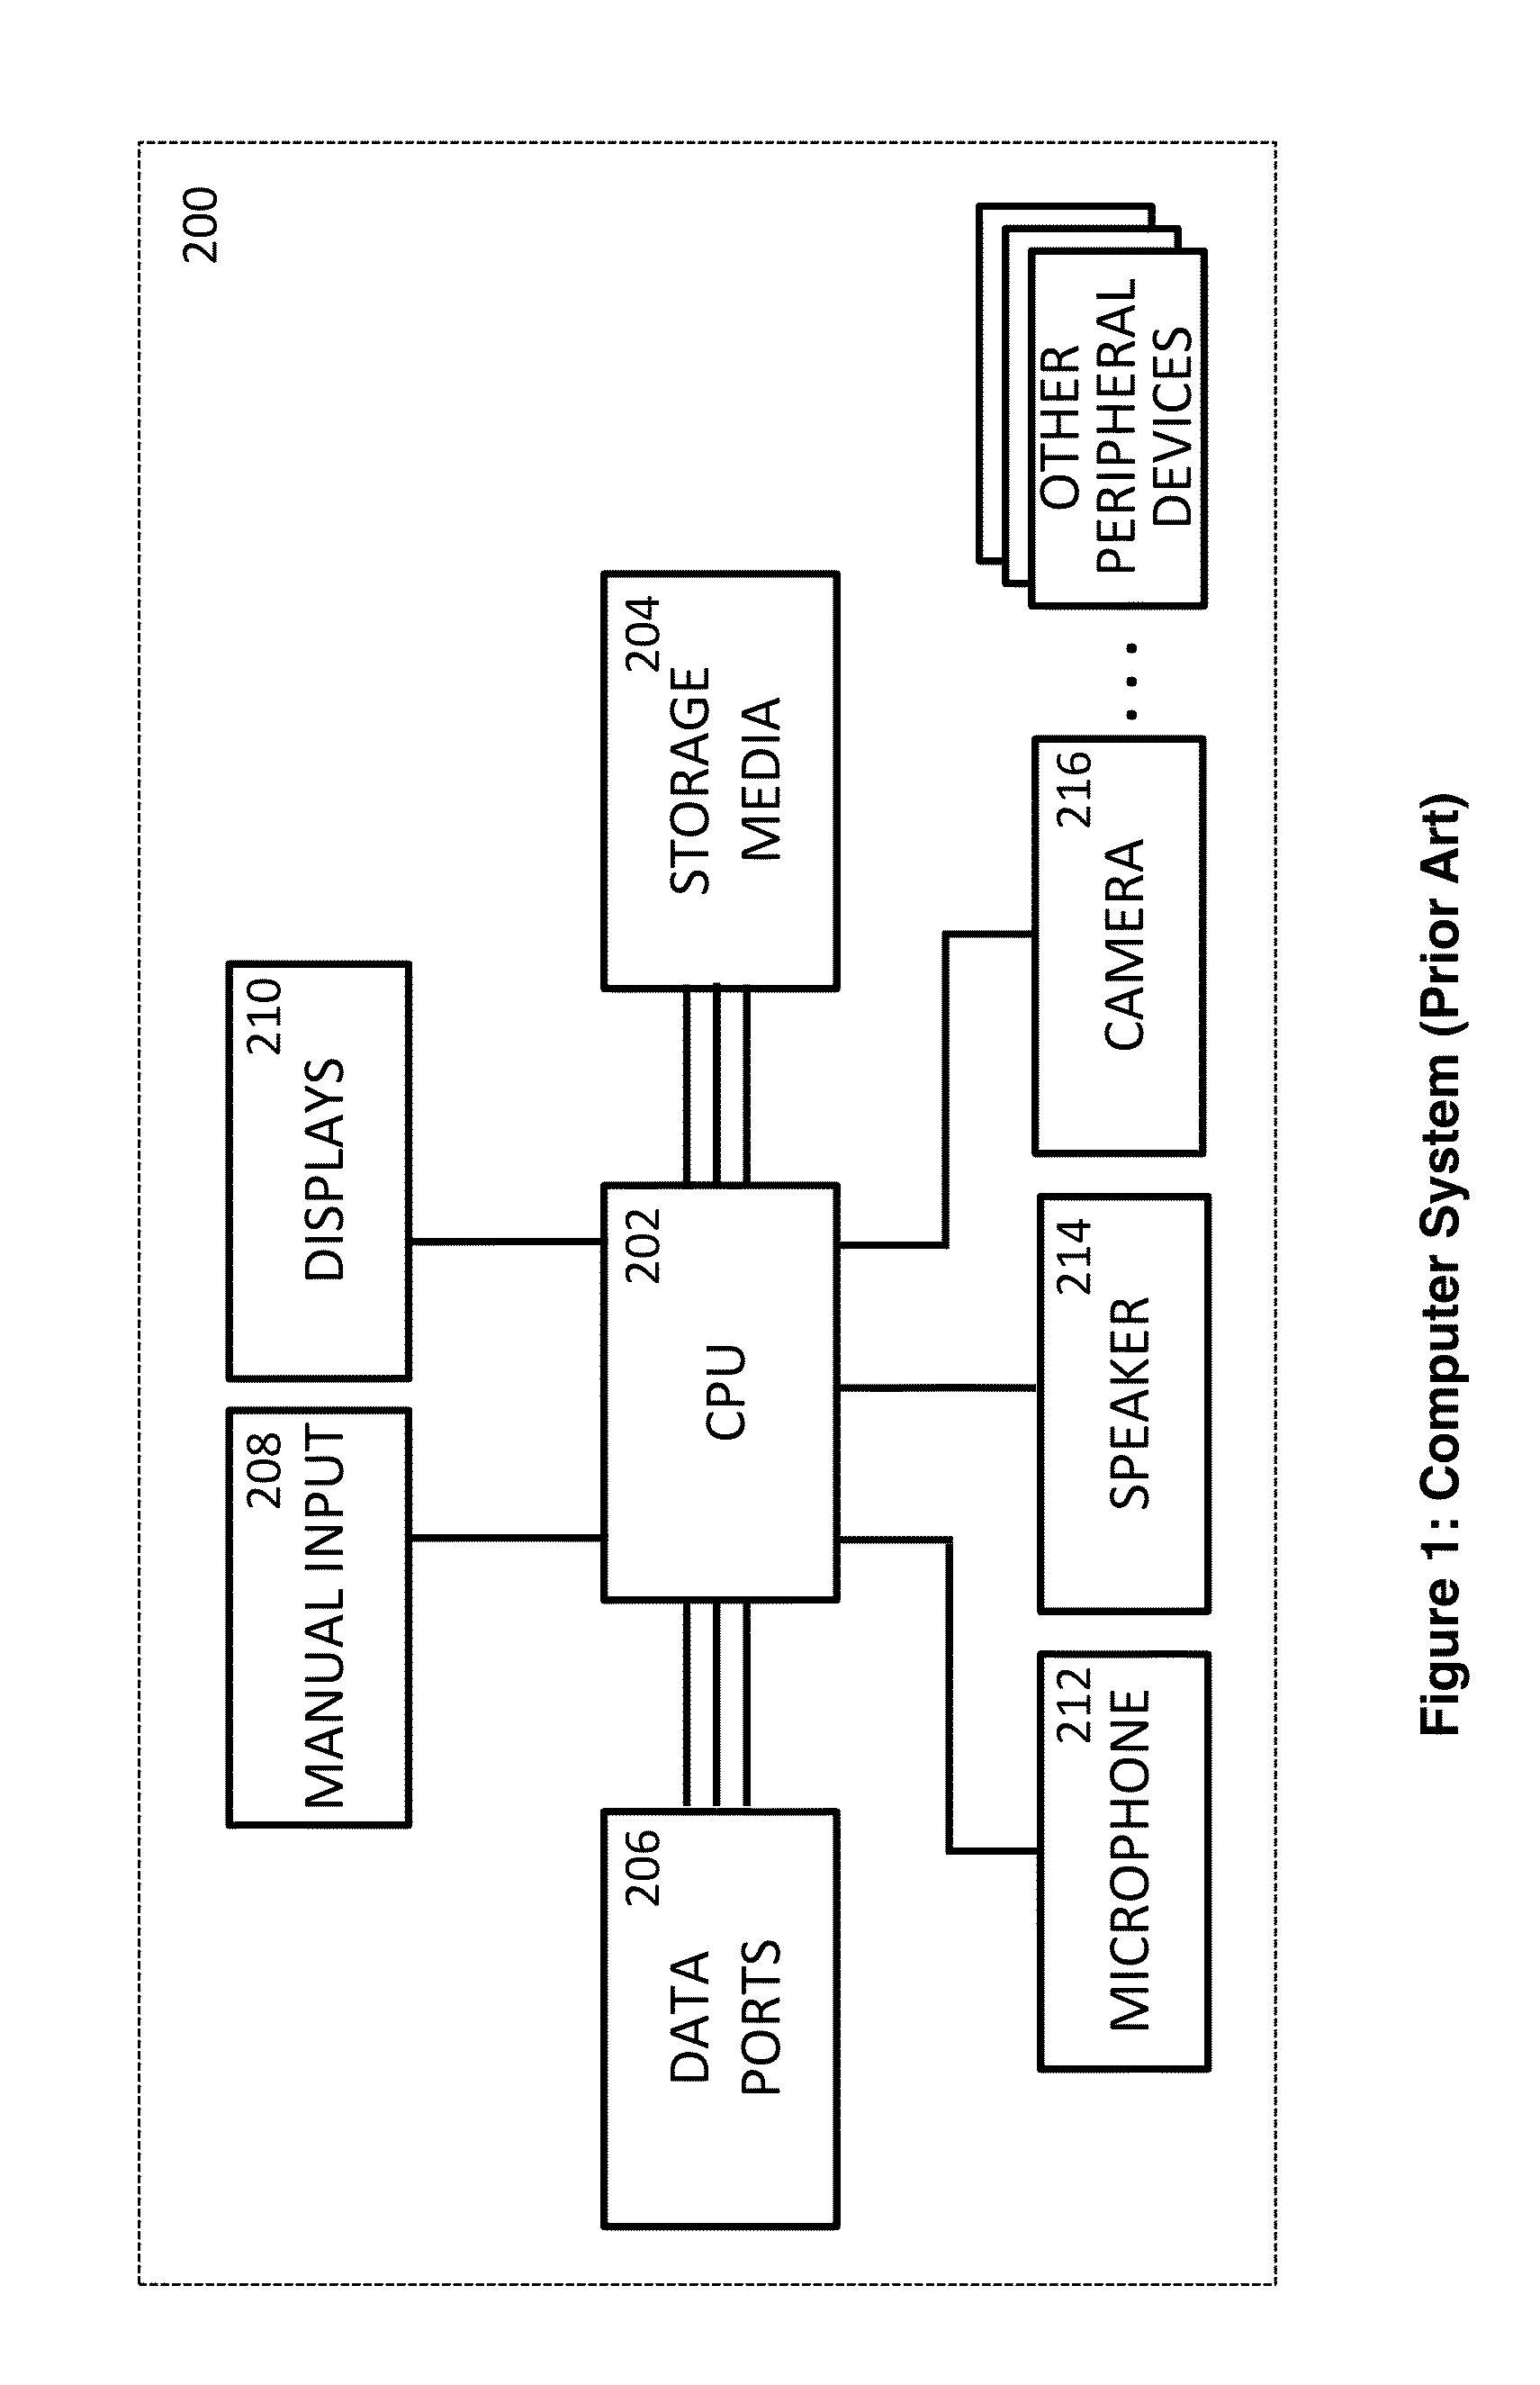 Voice driven operating system for interfacing with electronic devices: system, method, and architecture